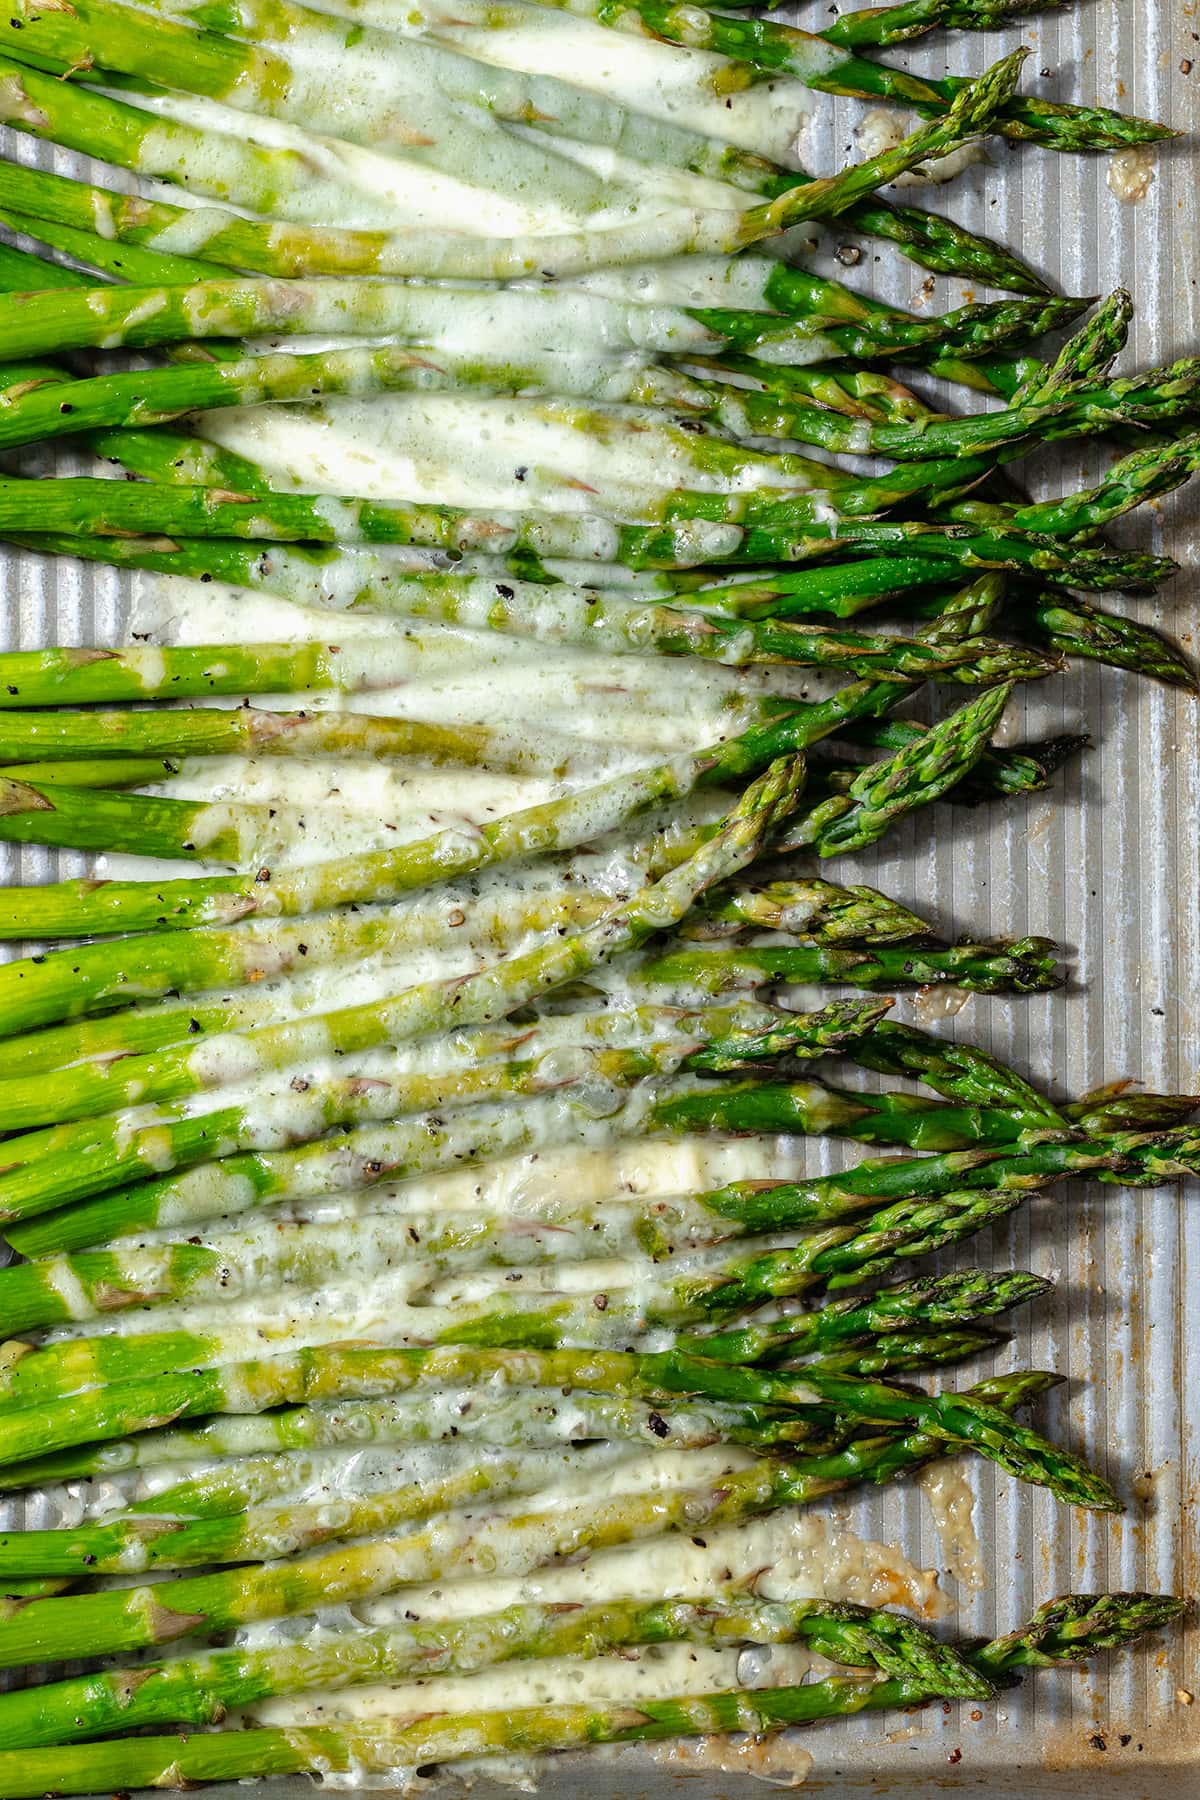 A close up photo of roasted asparagus spears on a baking sheet with cheese sprinkled on that has melted in the oven.